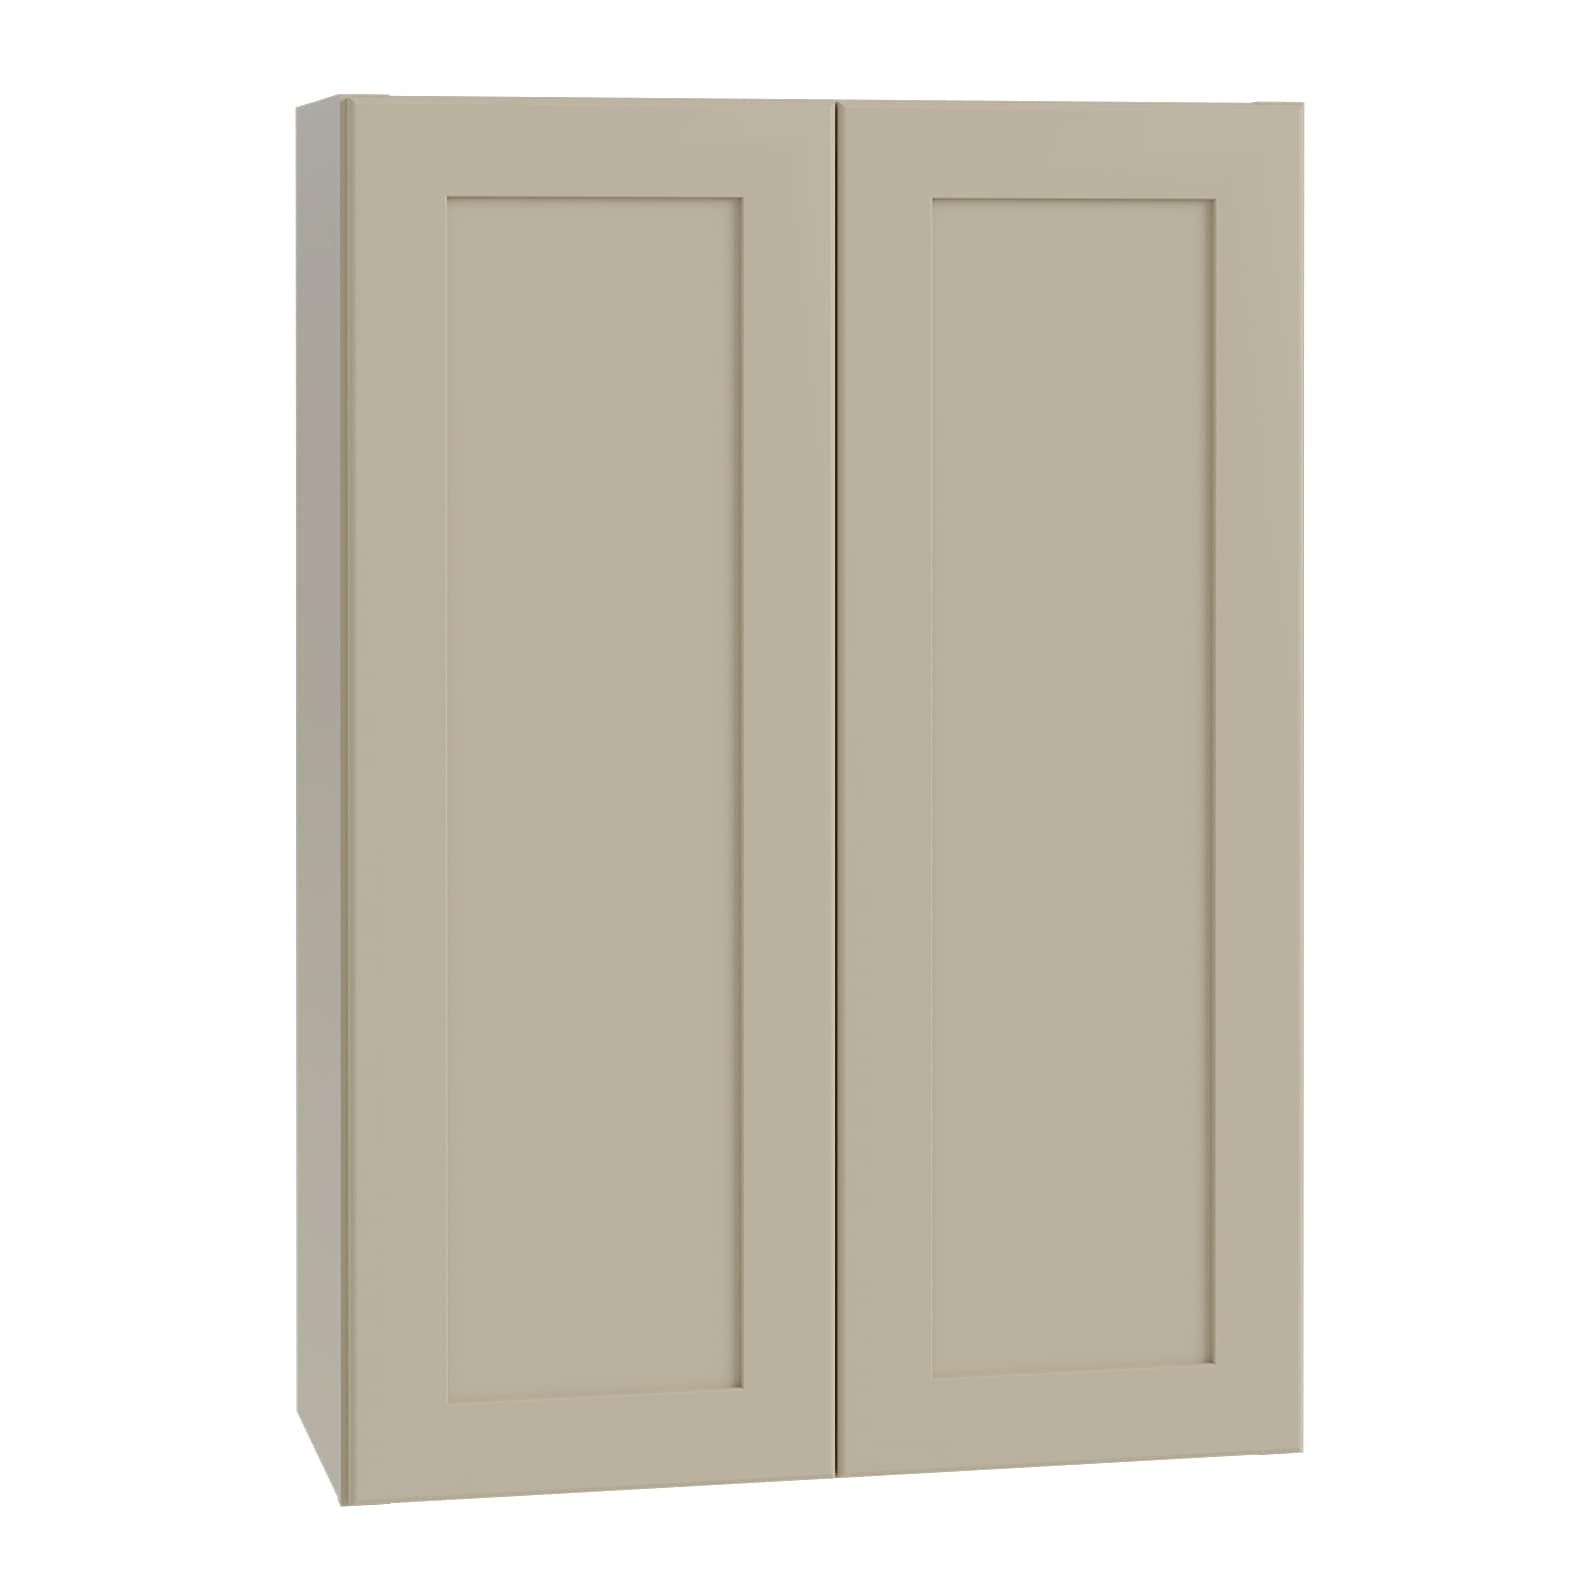 Luxxe Cabinetry 27-in W x 36-in H x 12-in D Norfolk Blended Cream Painted Door Wall Fully Assembled Semi-custom Cabinet in Off-White | W2736-NBC